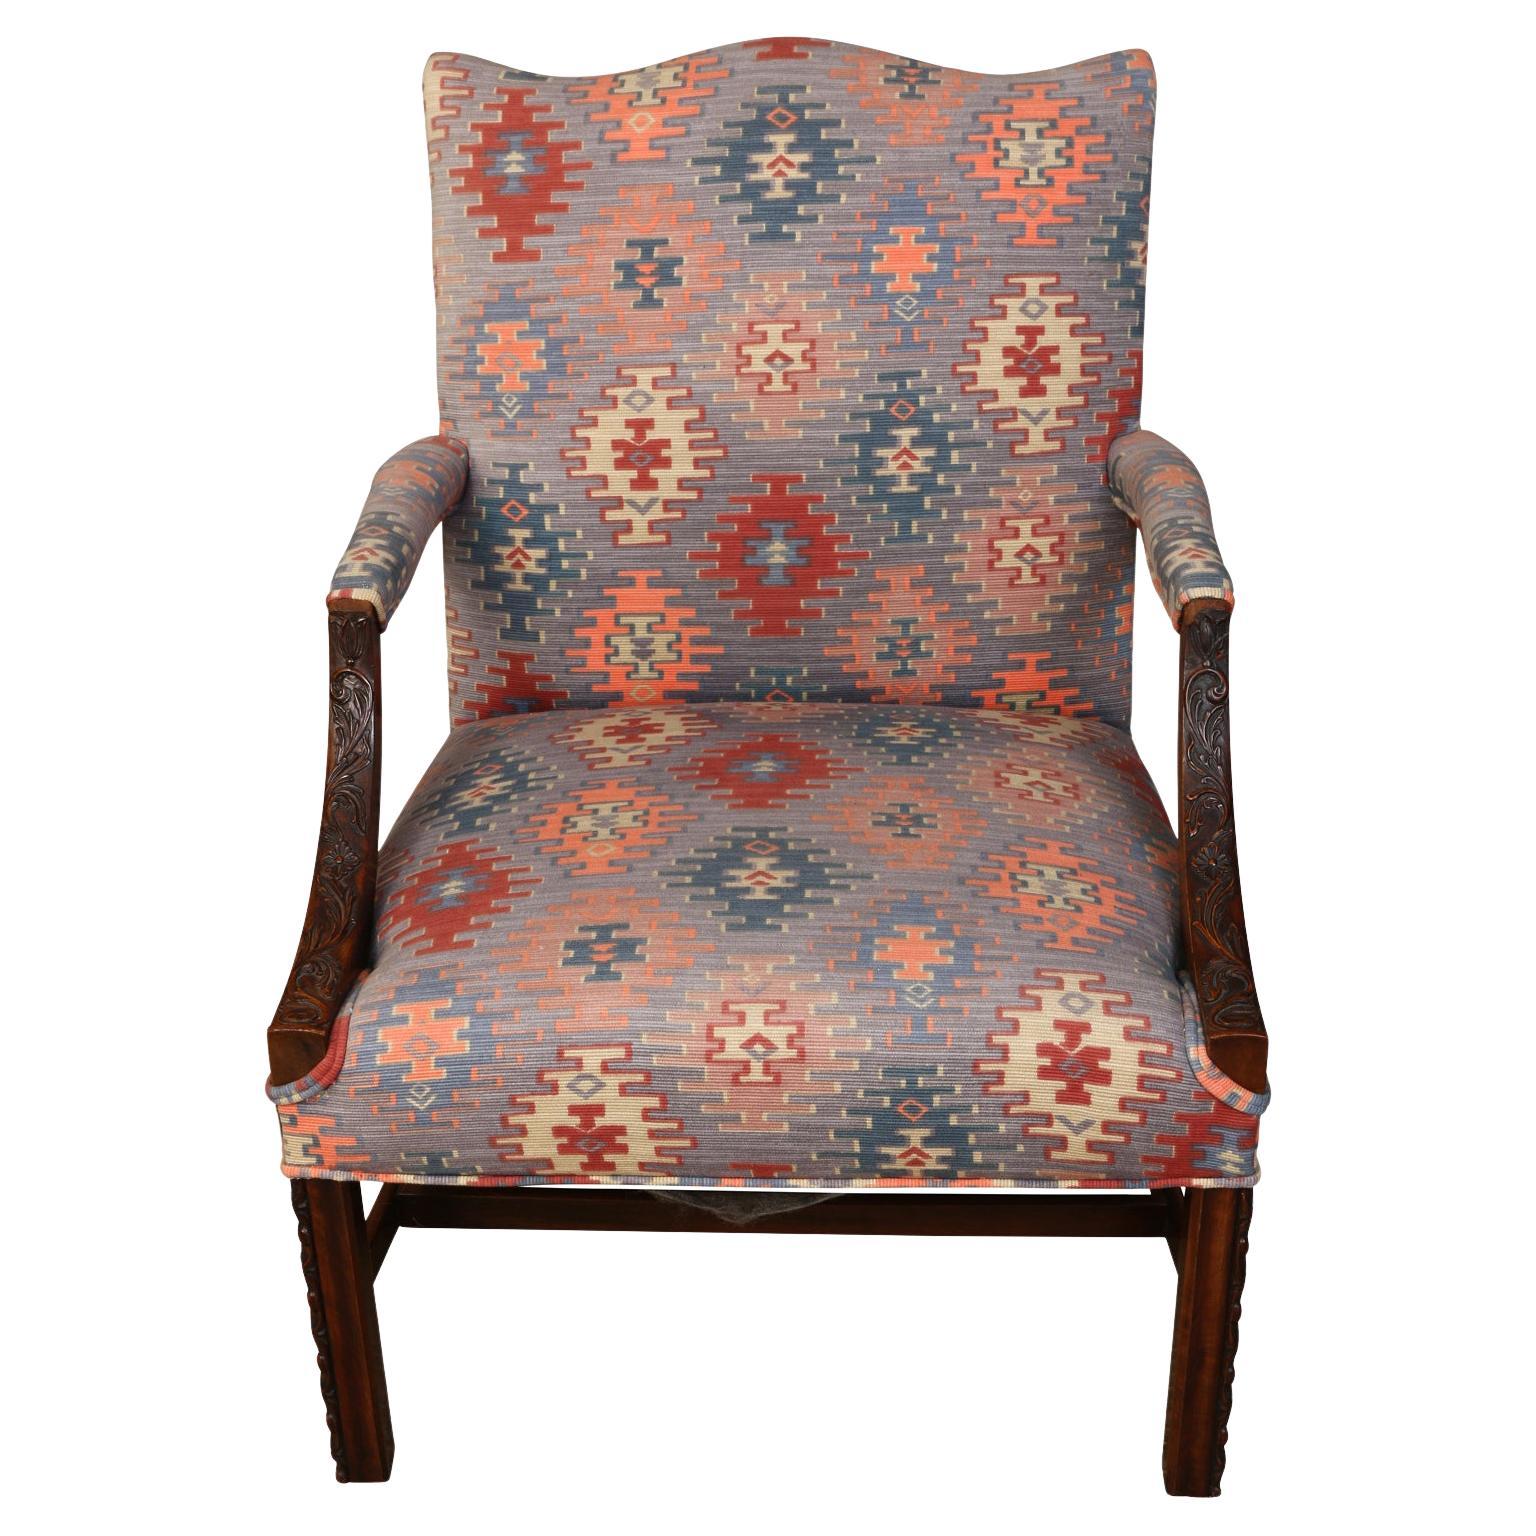 Vintage Carved Mahogany Library Chair in Ikat Kilim Fabric For Sale